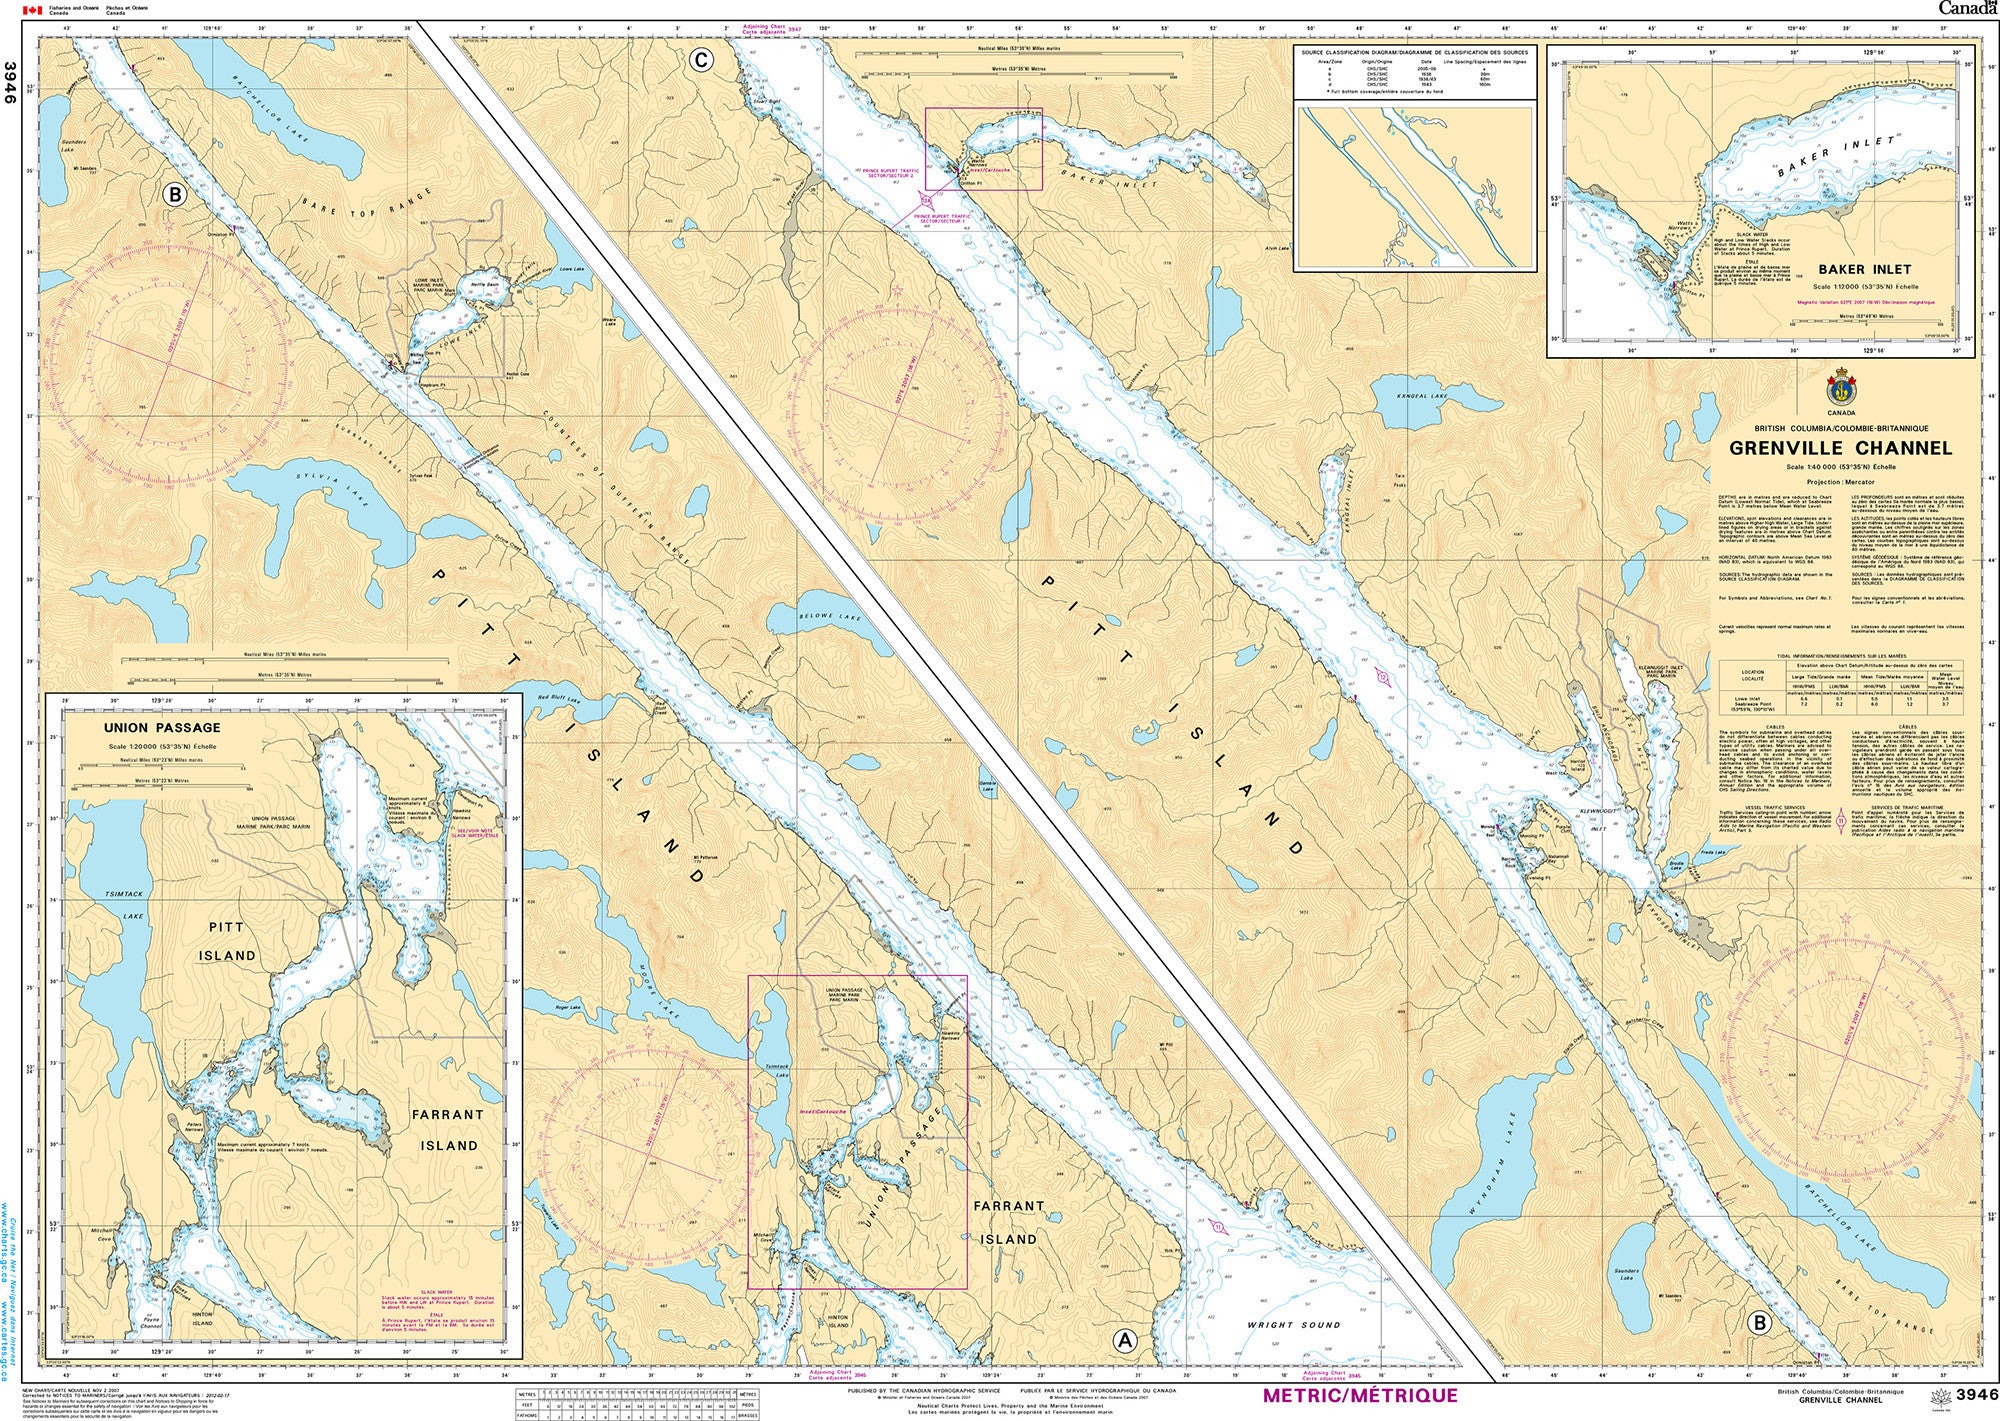 Canadian Hydrographic Service Nautical Chart CHS3946: Grenville Channel